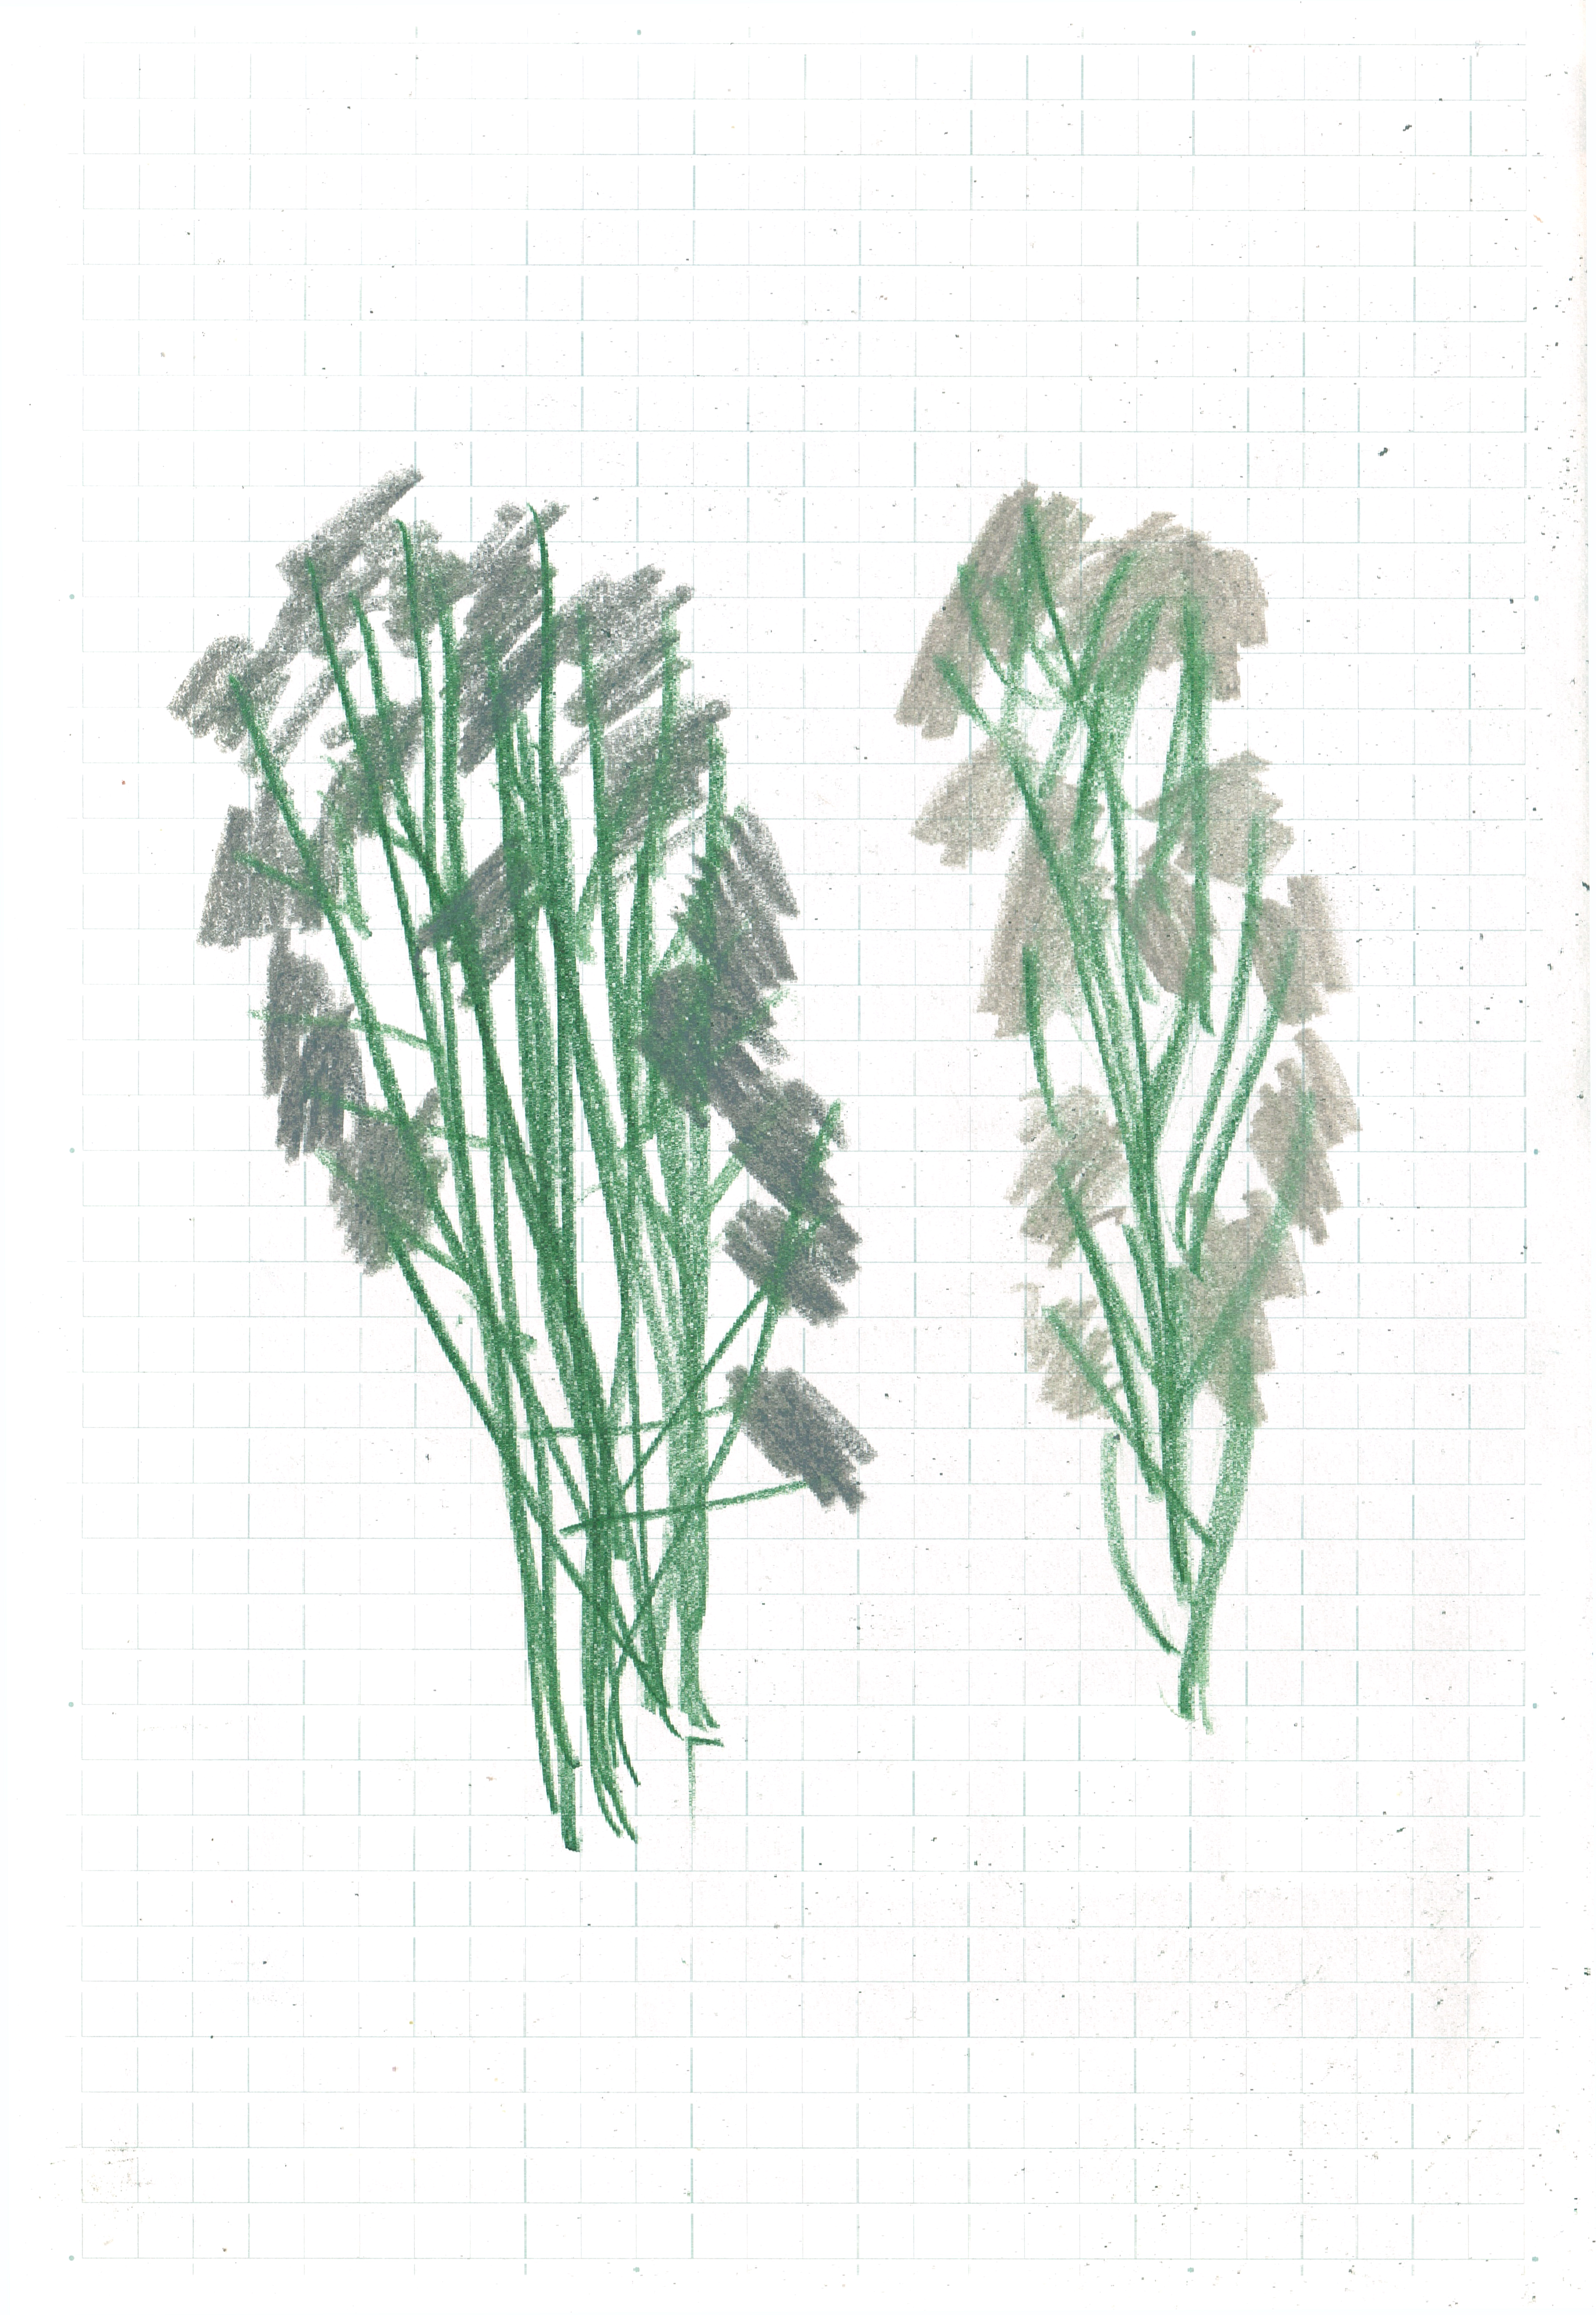 pencil drawing of two flower bouquets with green stems and grey scribbled flowers